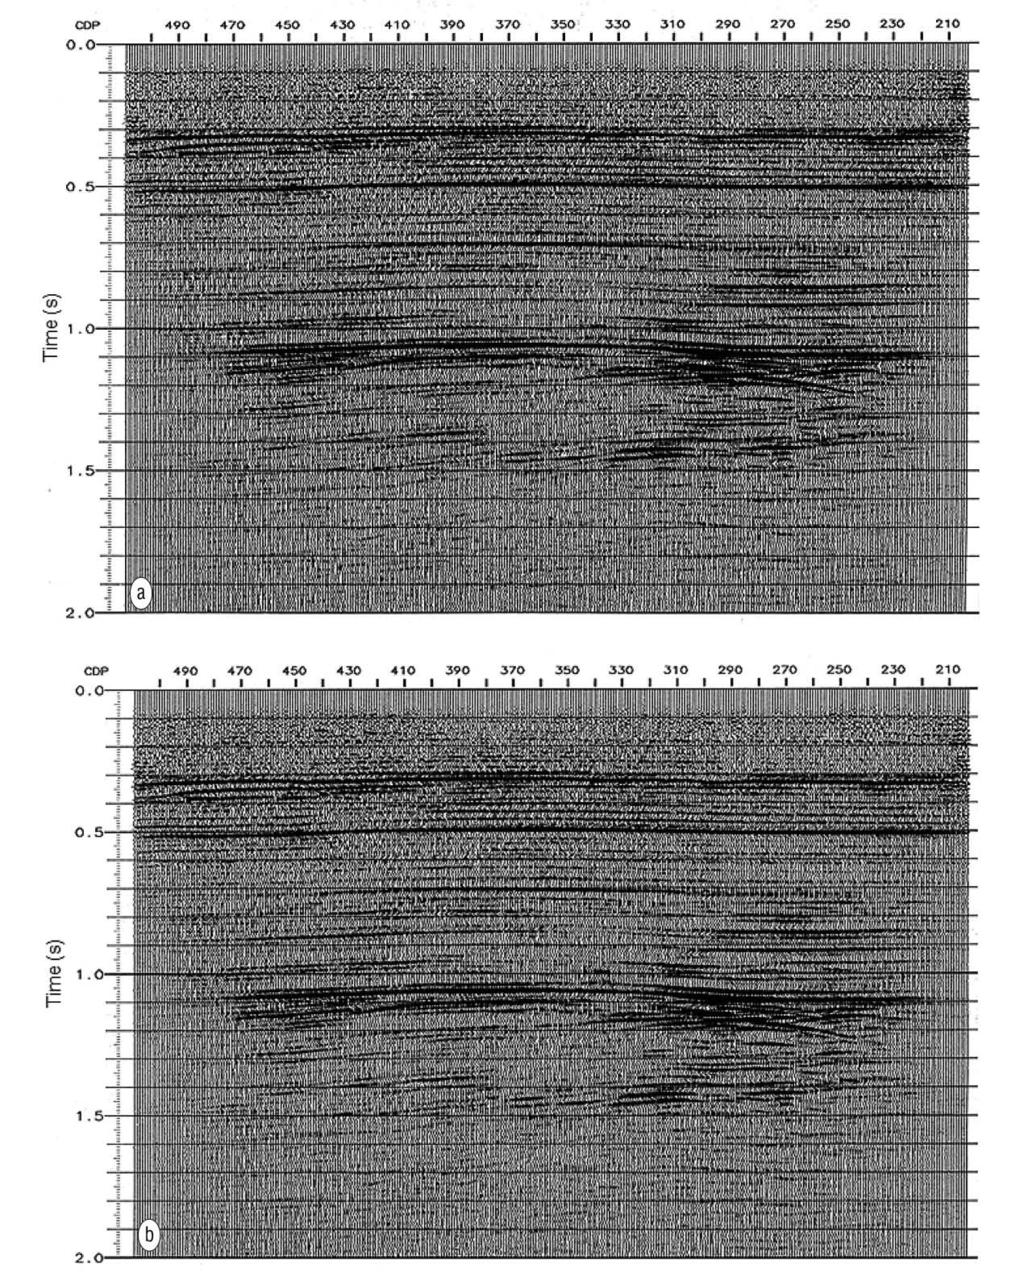 Figure 6. (a) West Texas 2D line recorded using a single 20-s sweep per VP. (b) The same West Texas 2D line recorded using four 5-s sweeps per VP. compared with six 8-s sweeps per VP.